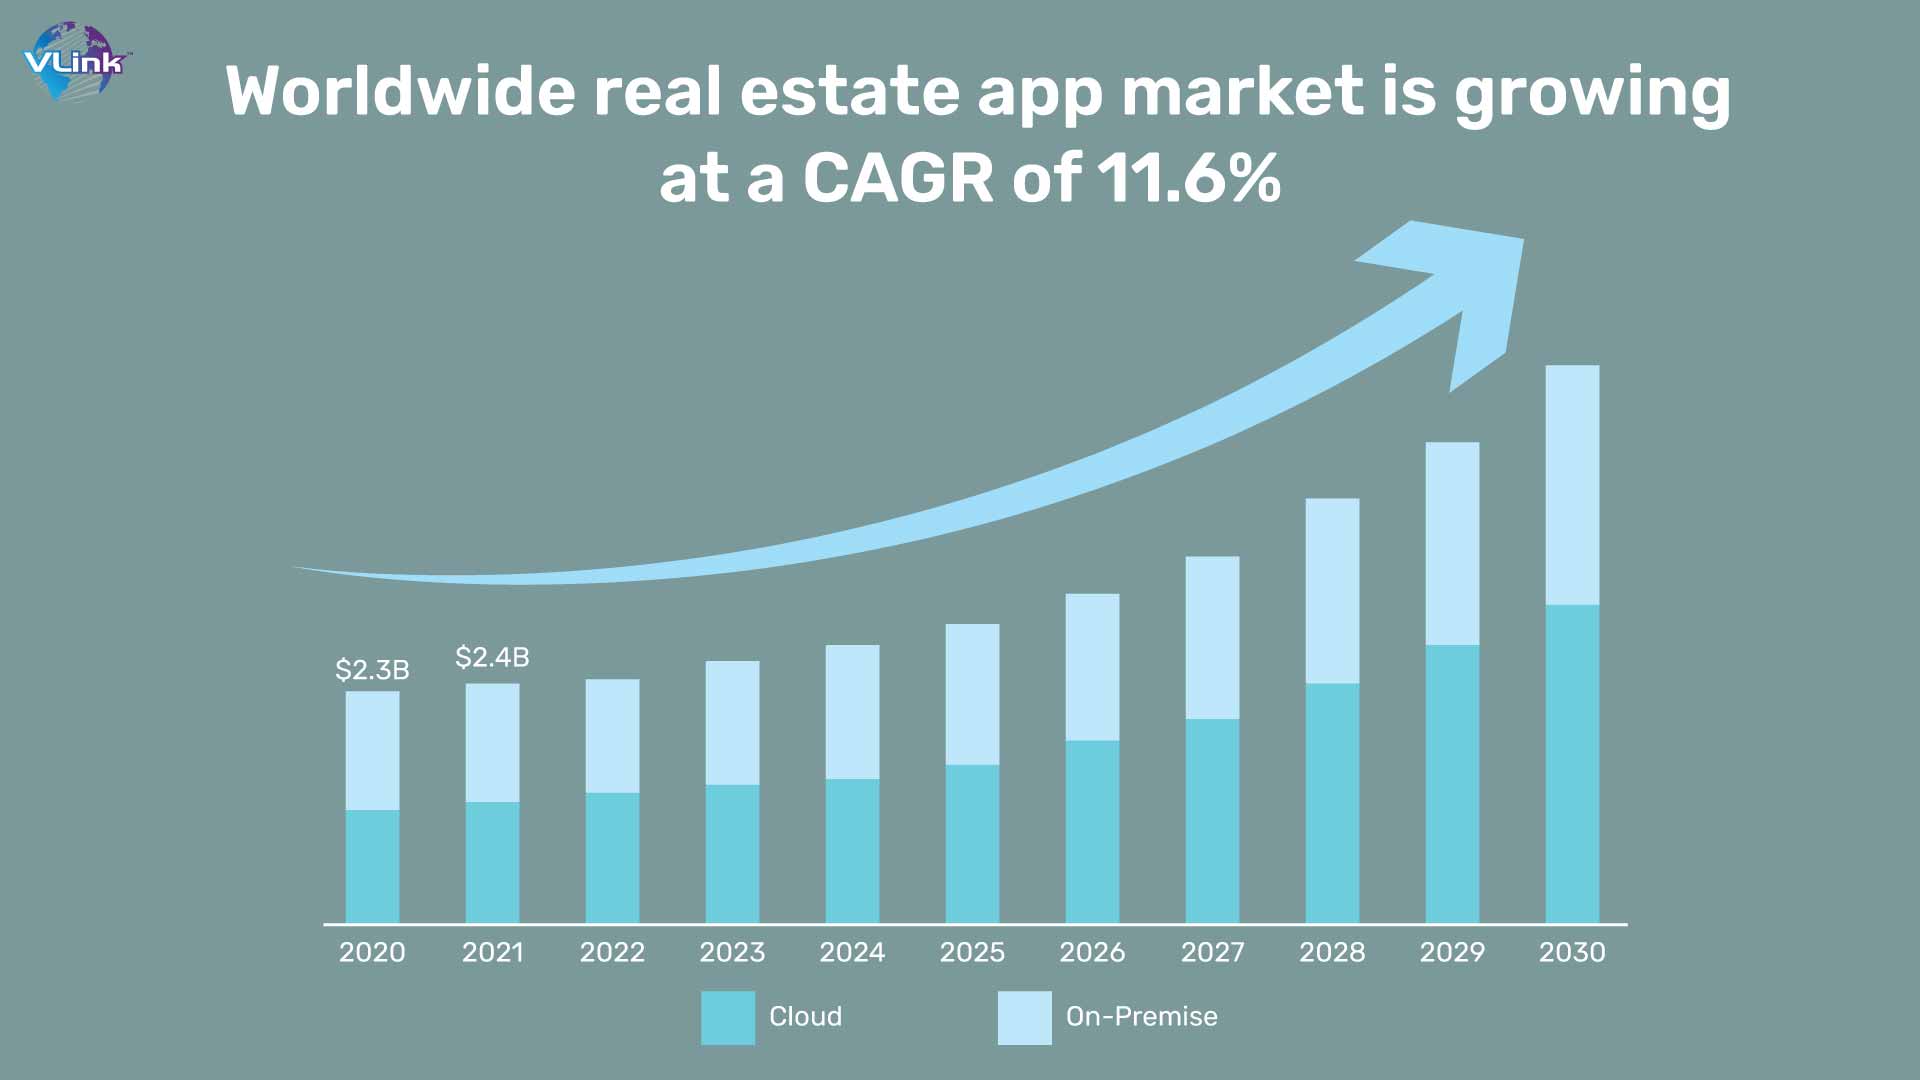 Worldwide real estate app market is growing at a CAGR of 11.6%